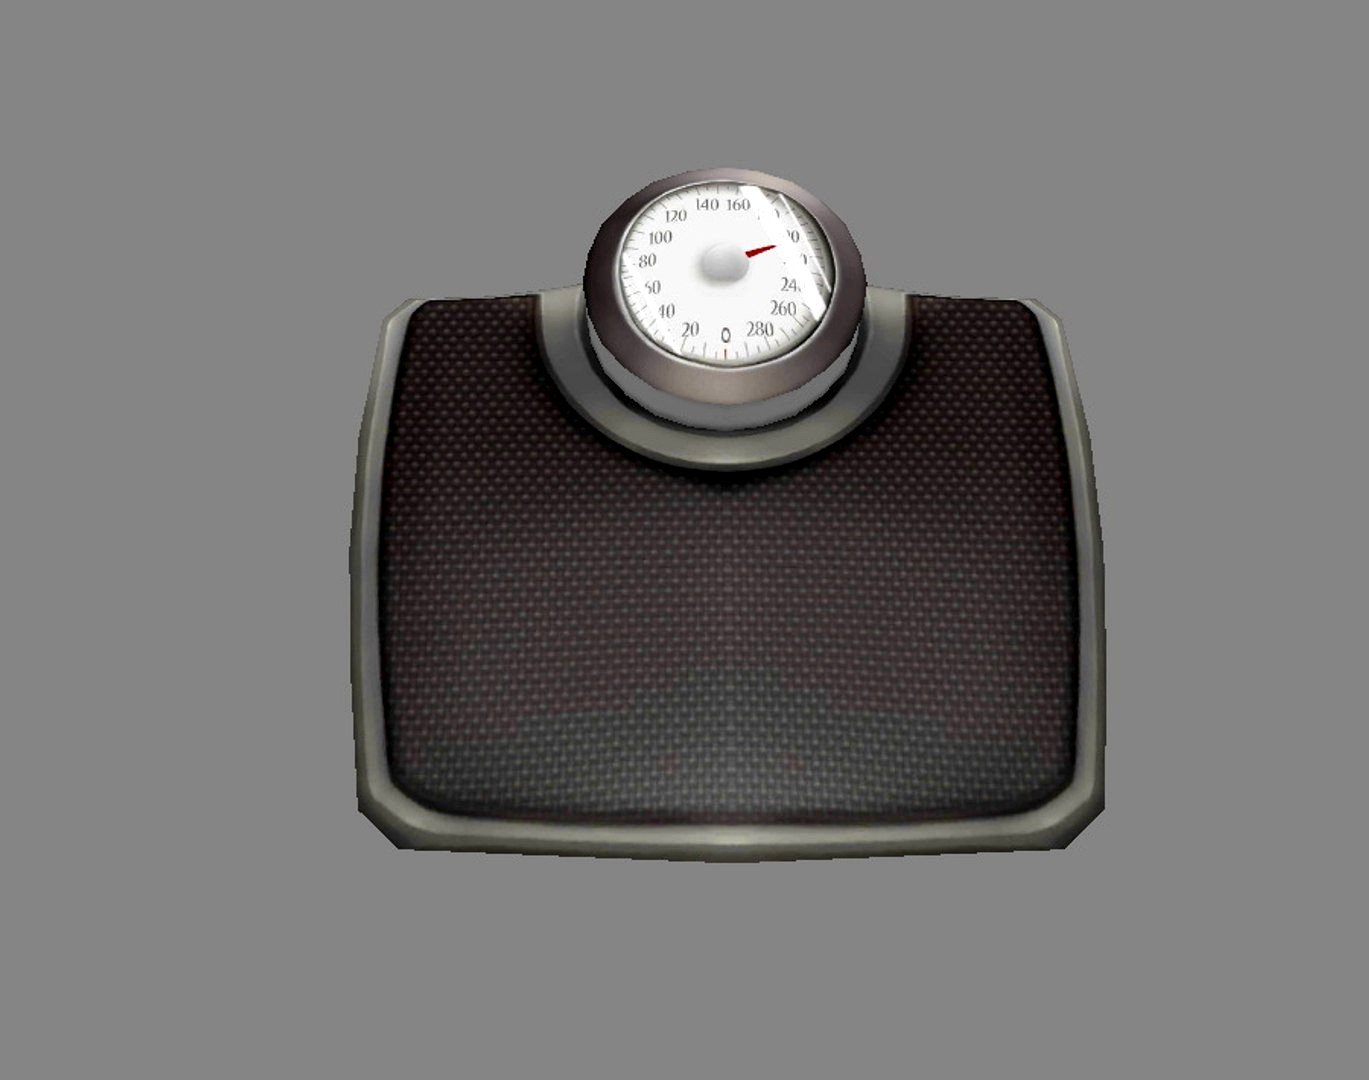 Weight scale or Bathroom Scale